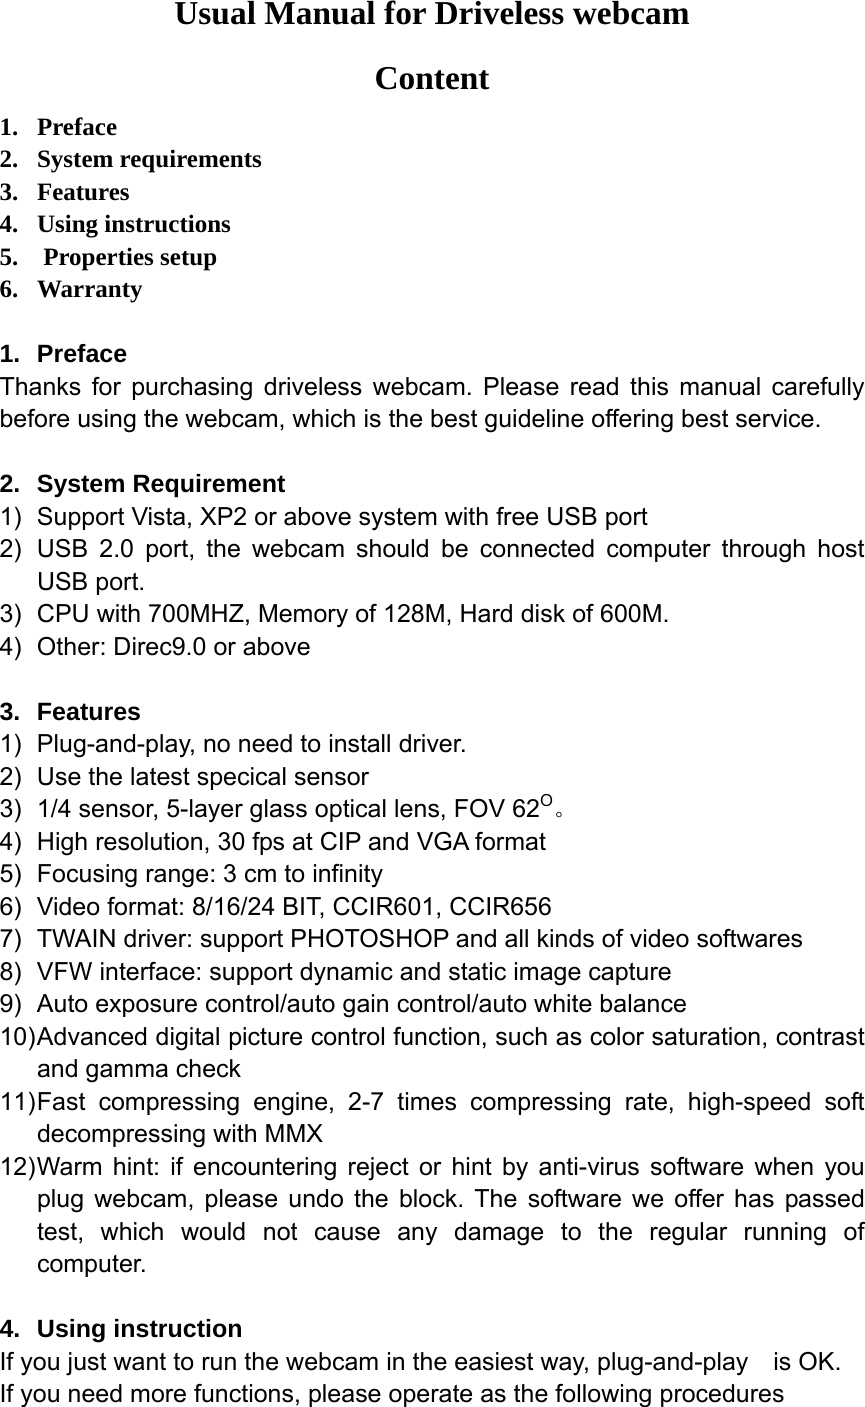 Usual Manual for Driveless webcam Content 1. Preface 2. System requirements 3. Features 4. Using instructions 5.  Properties setup 6. Warranty  1. Preface Thanks for purchasing driveless webcam. Please read this manual carefully before using the webcam, which is the best guideline offering best service.  2. System Requirement 1)  Support Vista, XP2 or above system with free USB port 2)  USB 2.0 port, the webcam should be connected computer through host USB port. 3)  CPU with 700MHZ, Memory of 128M, Hard disk of 600M.     4)  Other: Direc9.0 or above  3. Features 1)  Plug-and-play, no need to install driver. 2)  Use the latest specical sensor 3)  1/4 sensor, 5-layer glass optical lens, FOV 62O。 4)  High resolution, 30 fps at CIP and VGA format 5)  Focusing range: 3 cm to infinity 6)  Video format: 8/16/24 BIT, CCIR601, CCIR656 7)  TWAIN driver: support PHOTOSHOP and all kinds of video softwares 8)  VFW interface: support dynamic and static image capture 9)  Auto exposure control/auto gain control/auto white balance 10) Advanced digital picture control function, such as color saturation, contrast and gamma check 11) Fast compressing engine, 2-7 times compressing rate, high-speed soft decompressing with MMX 12) Warm hint: if encountering reject or hint by anti-virus software when you plug webcam, please undo the block. The software we offer has passed test, which would not cause any damage to the regular running of computer.  4. Using instruction If you just want to run the webcam in the easiest way, plug-and-play  is OK. If you need more functions, please operate as the following procedures 